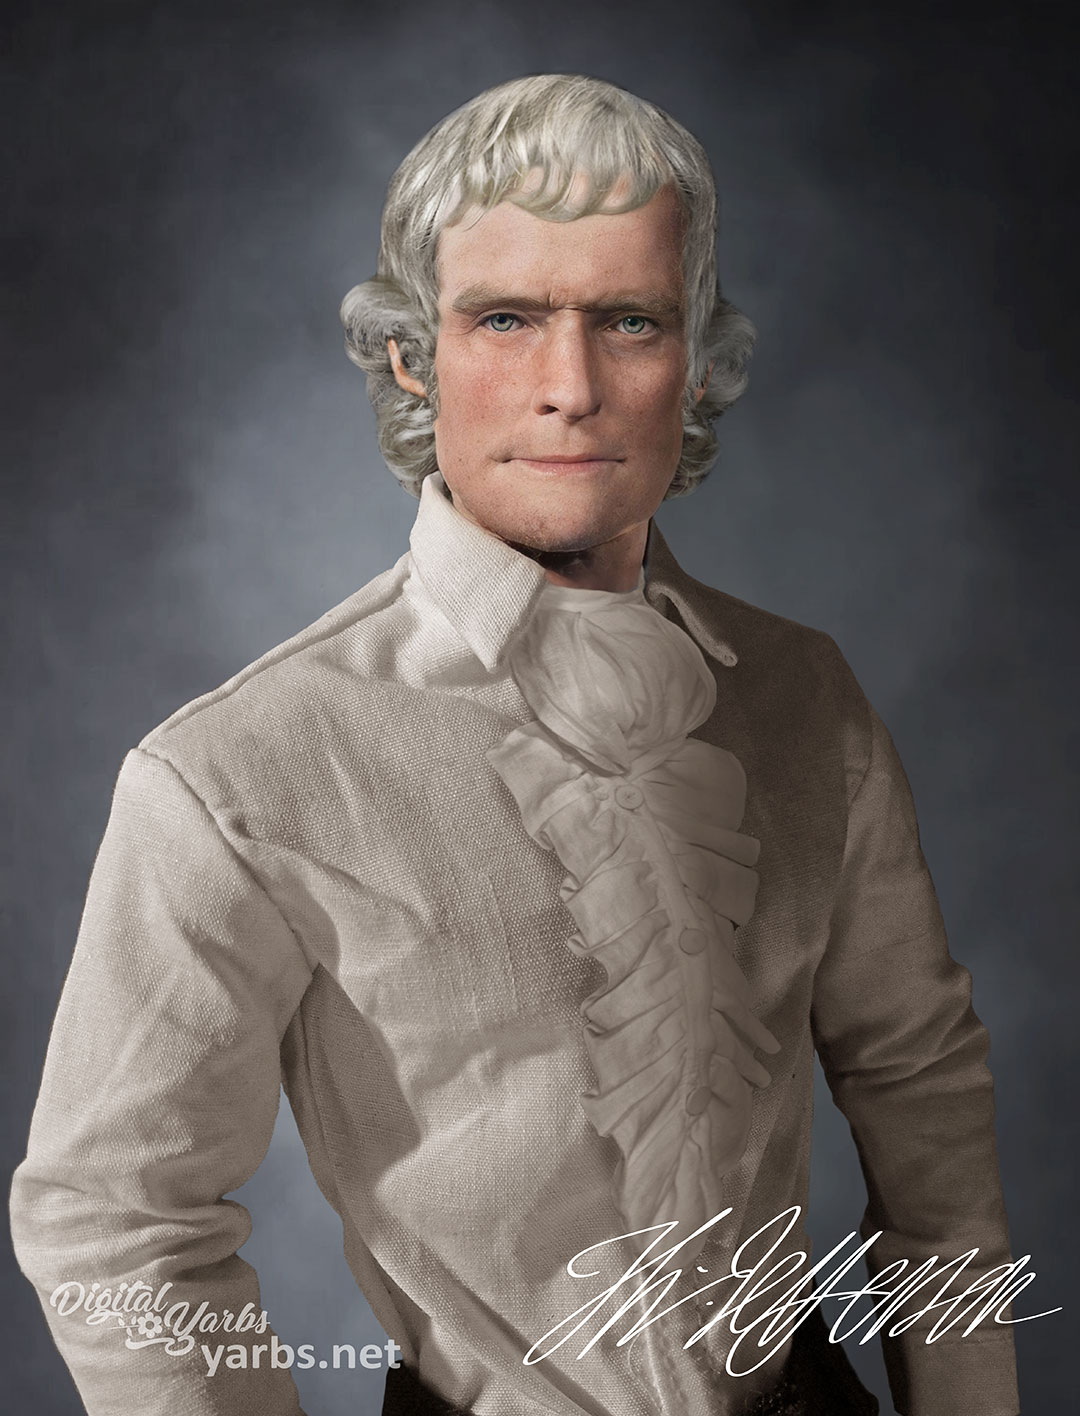 Another view of Thomas Jefferson